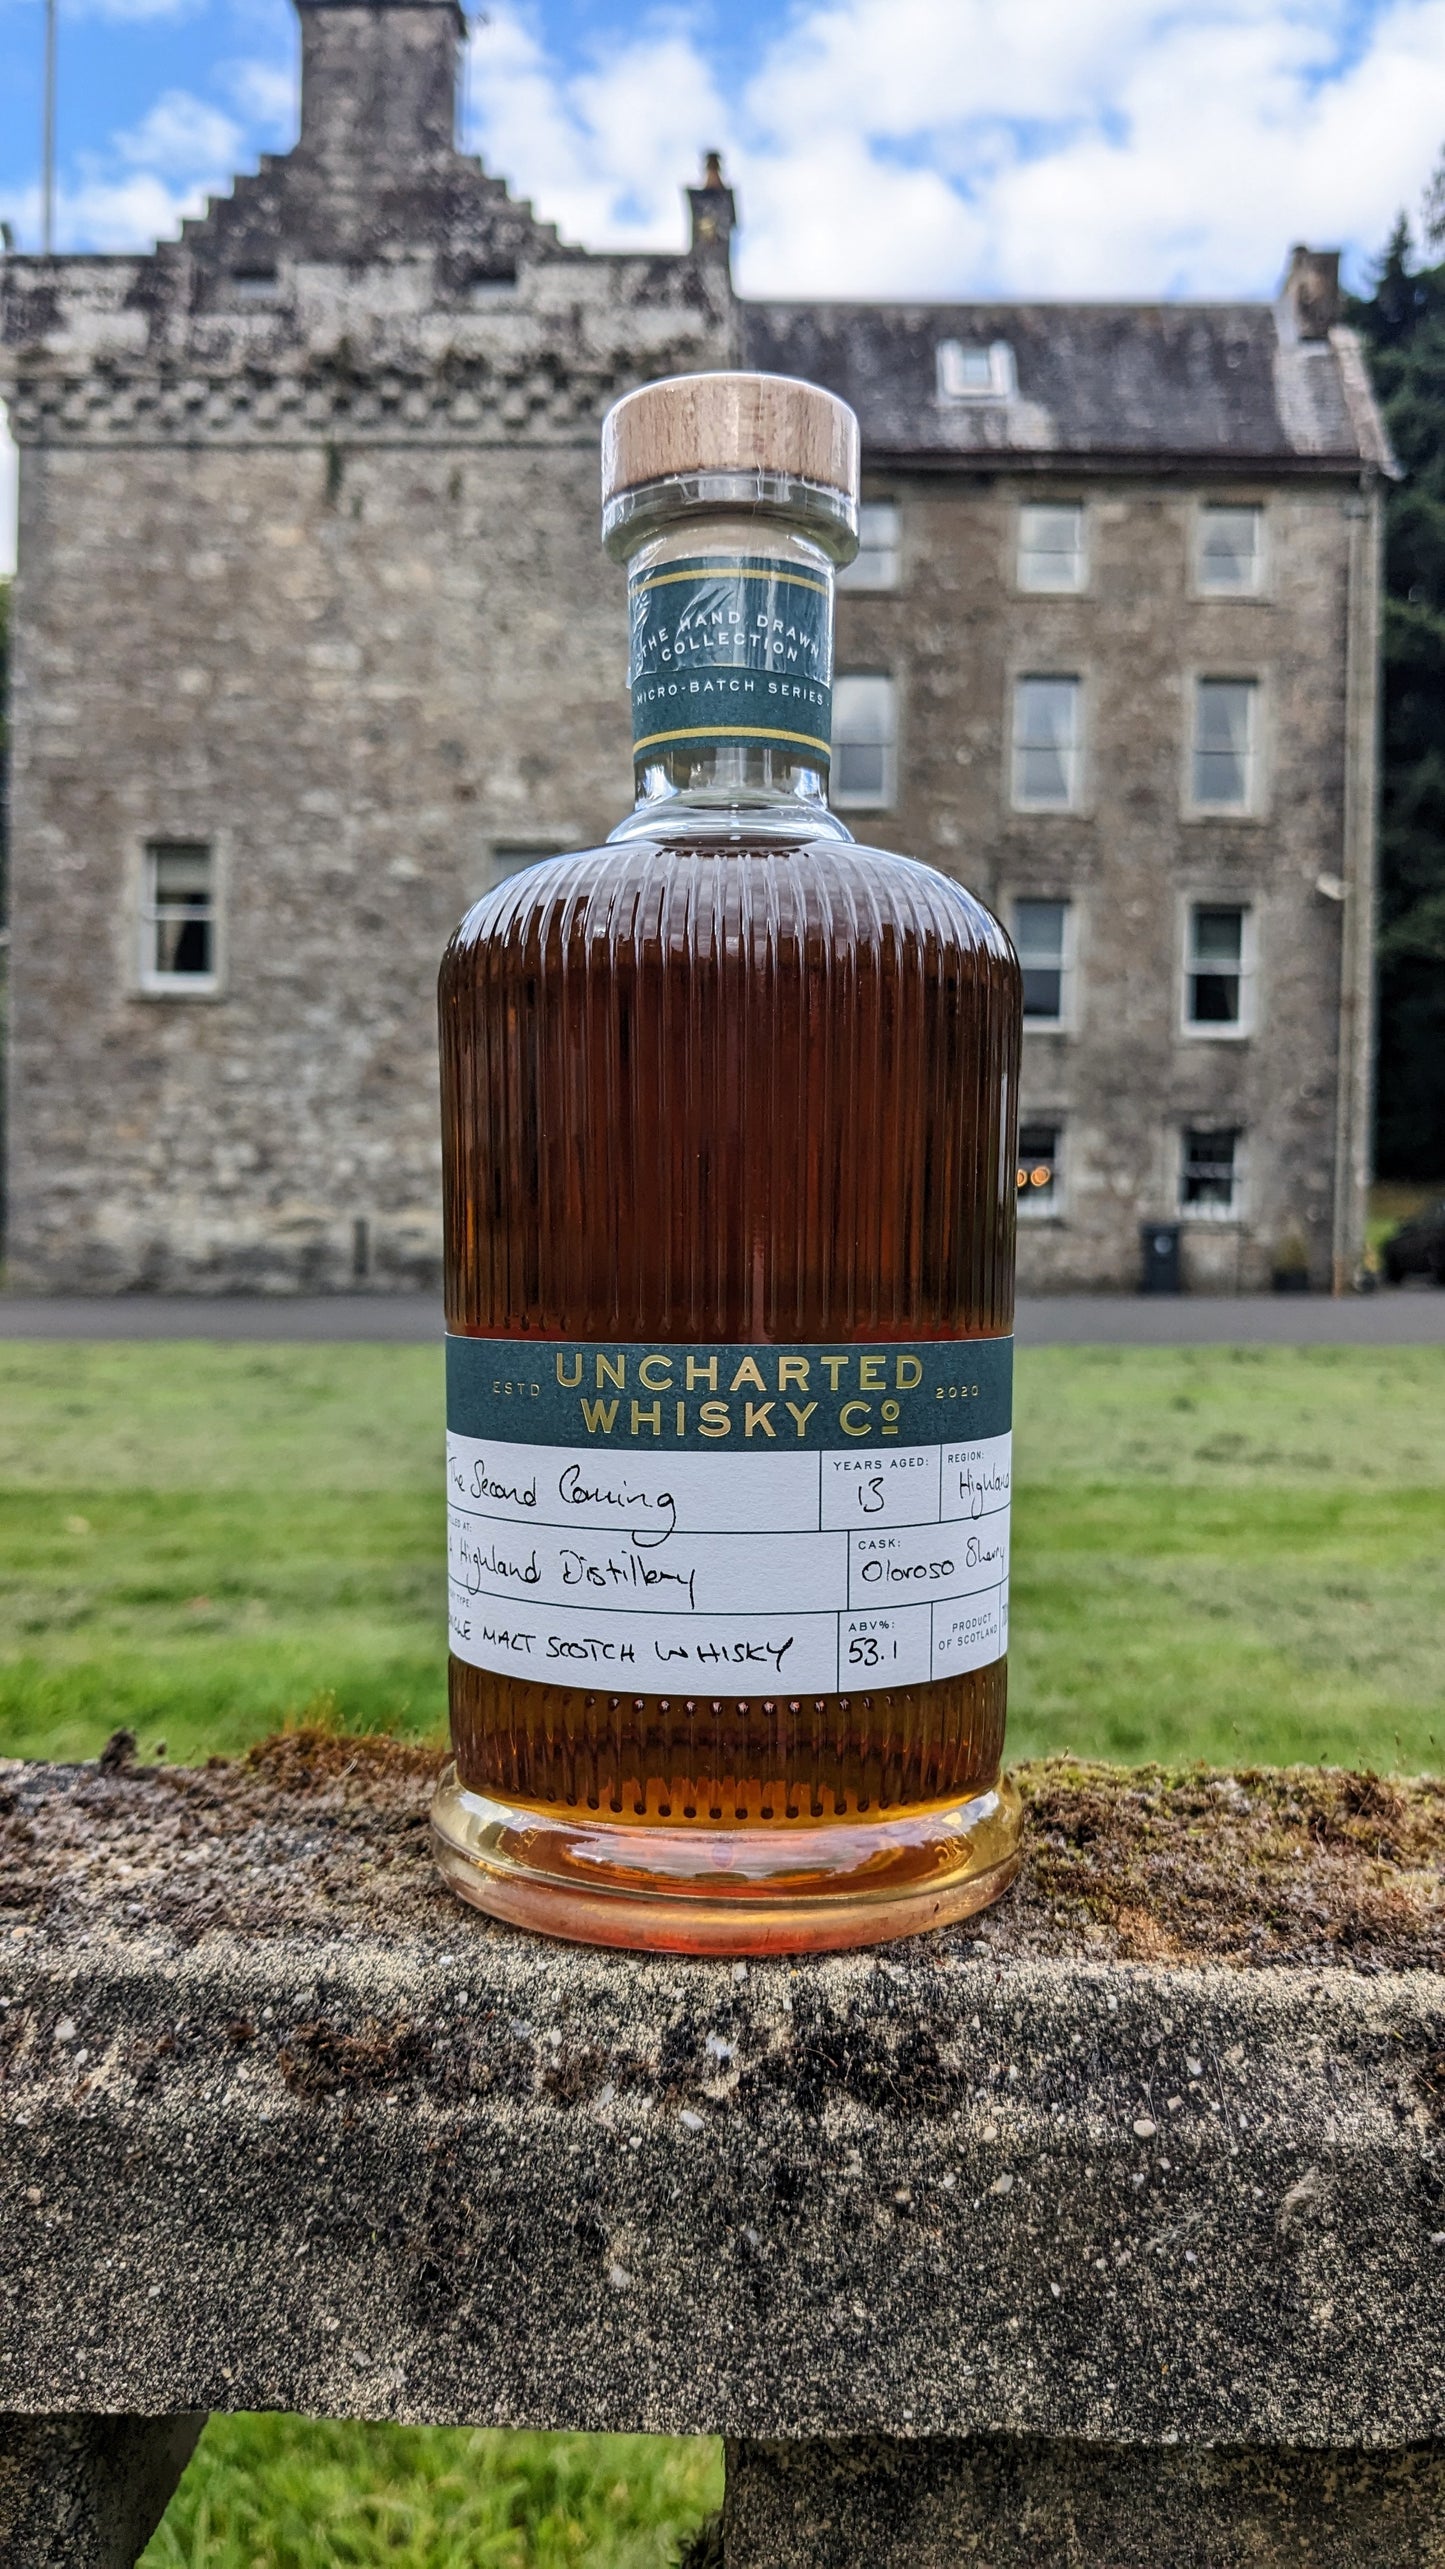 Uncharted Whisky Co. The Second Coming - 13yo UnNamed Highland Malt Whisky (70cl, 53.1%)